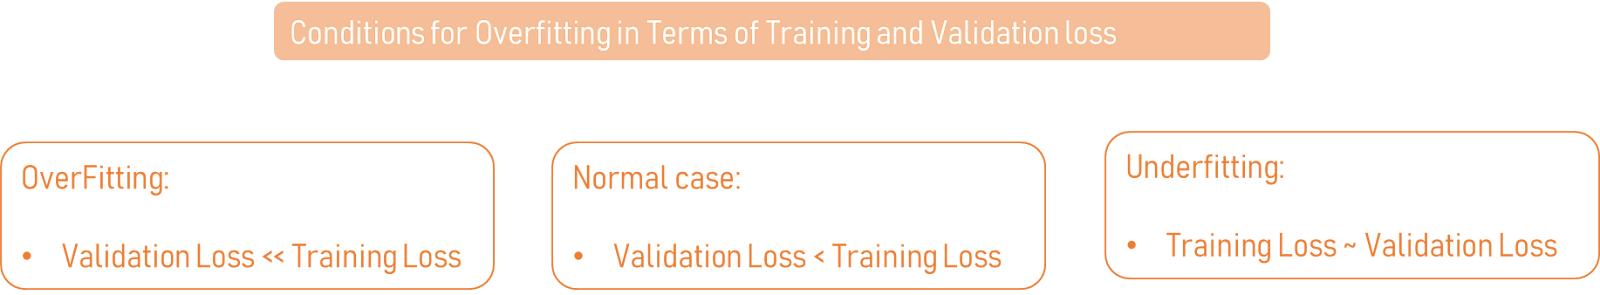 Conditions for overfitting in terms of training and validation loss